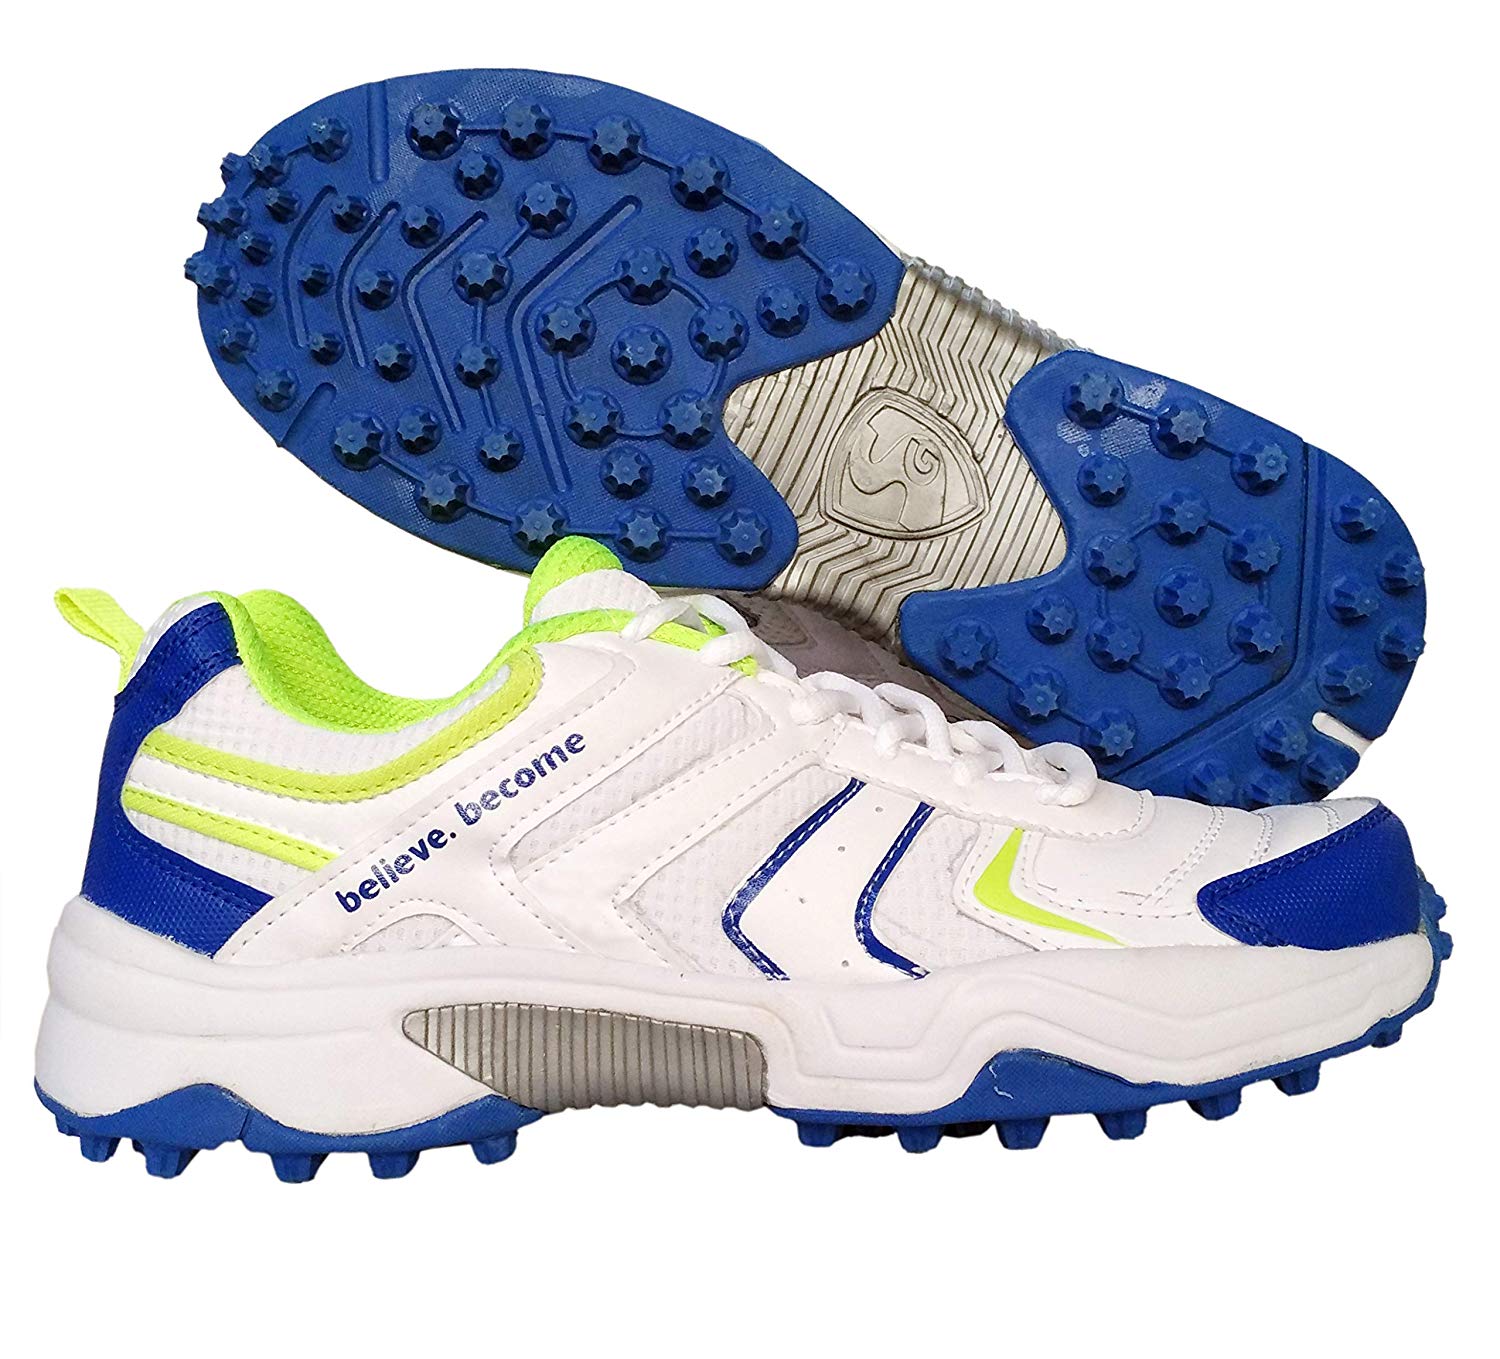 rubber spikes running shoes